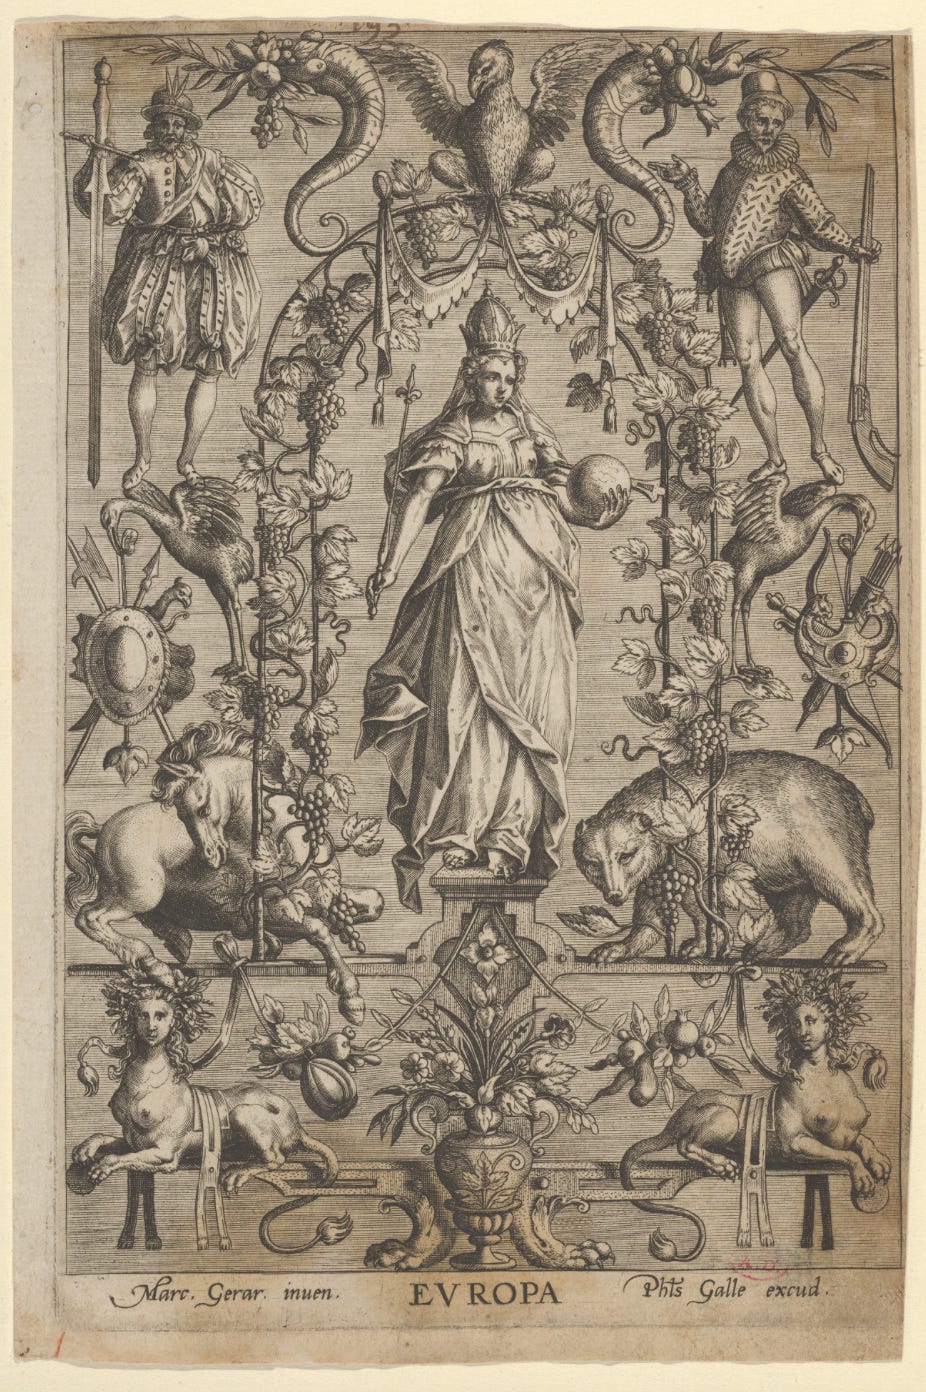 A sepia engraving from the late sixteenth century. From the Met’s description: “In this engraving, Europe is shown dressed as a queen wearing a crown and carrying a scepter and orb of the world. She is placed beneath a cloth of honor and framed by two fashionably dressed soldiers. Beside her are panoplies of arms–likely the spoils of war—and animals long associated with the continent: a fierce bear, a noble horse, and the eagle of empire.”